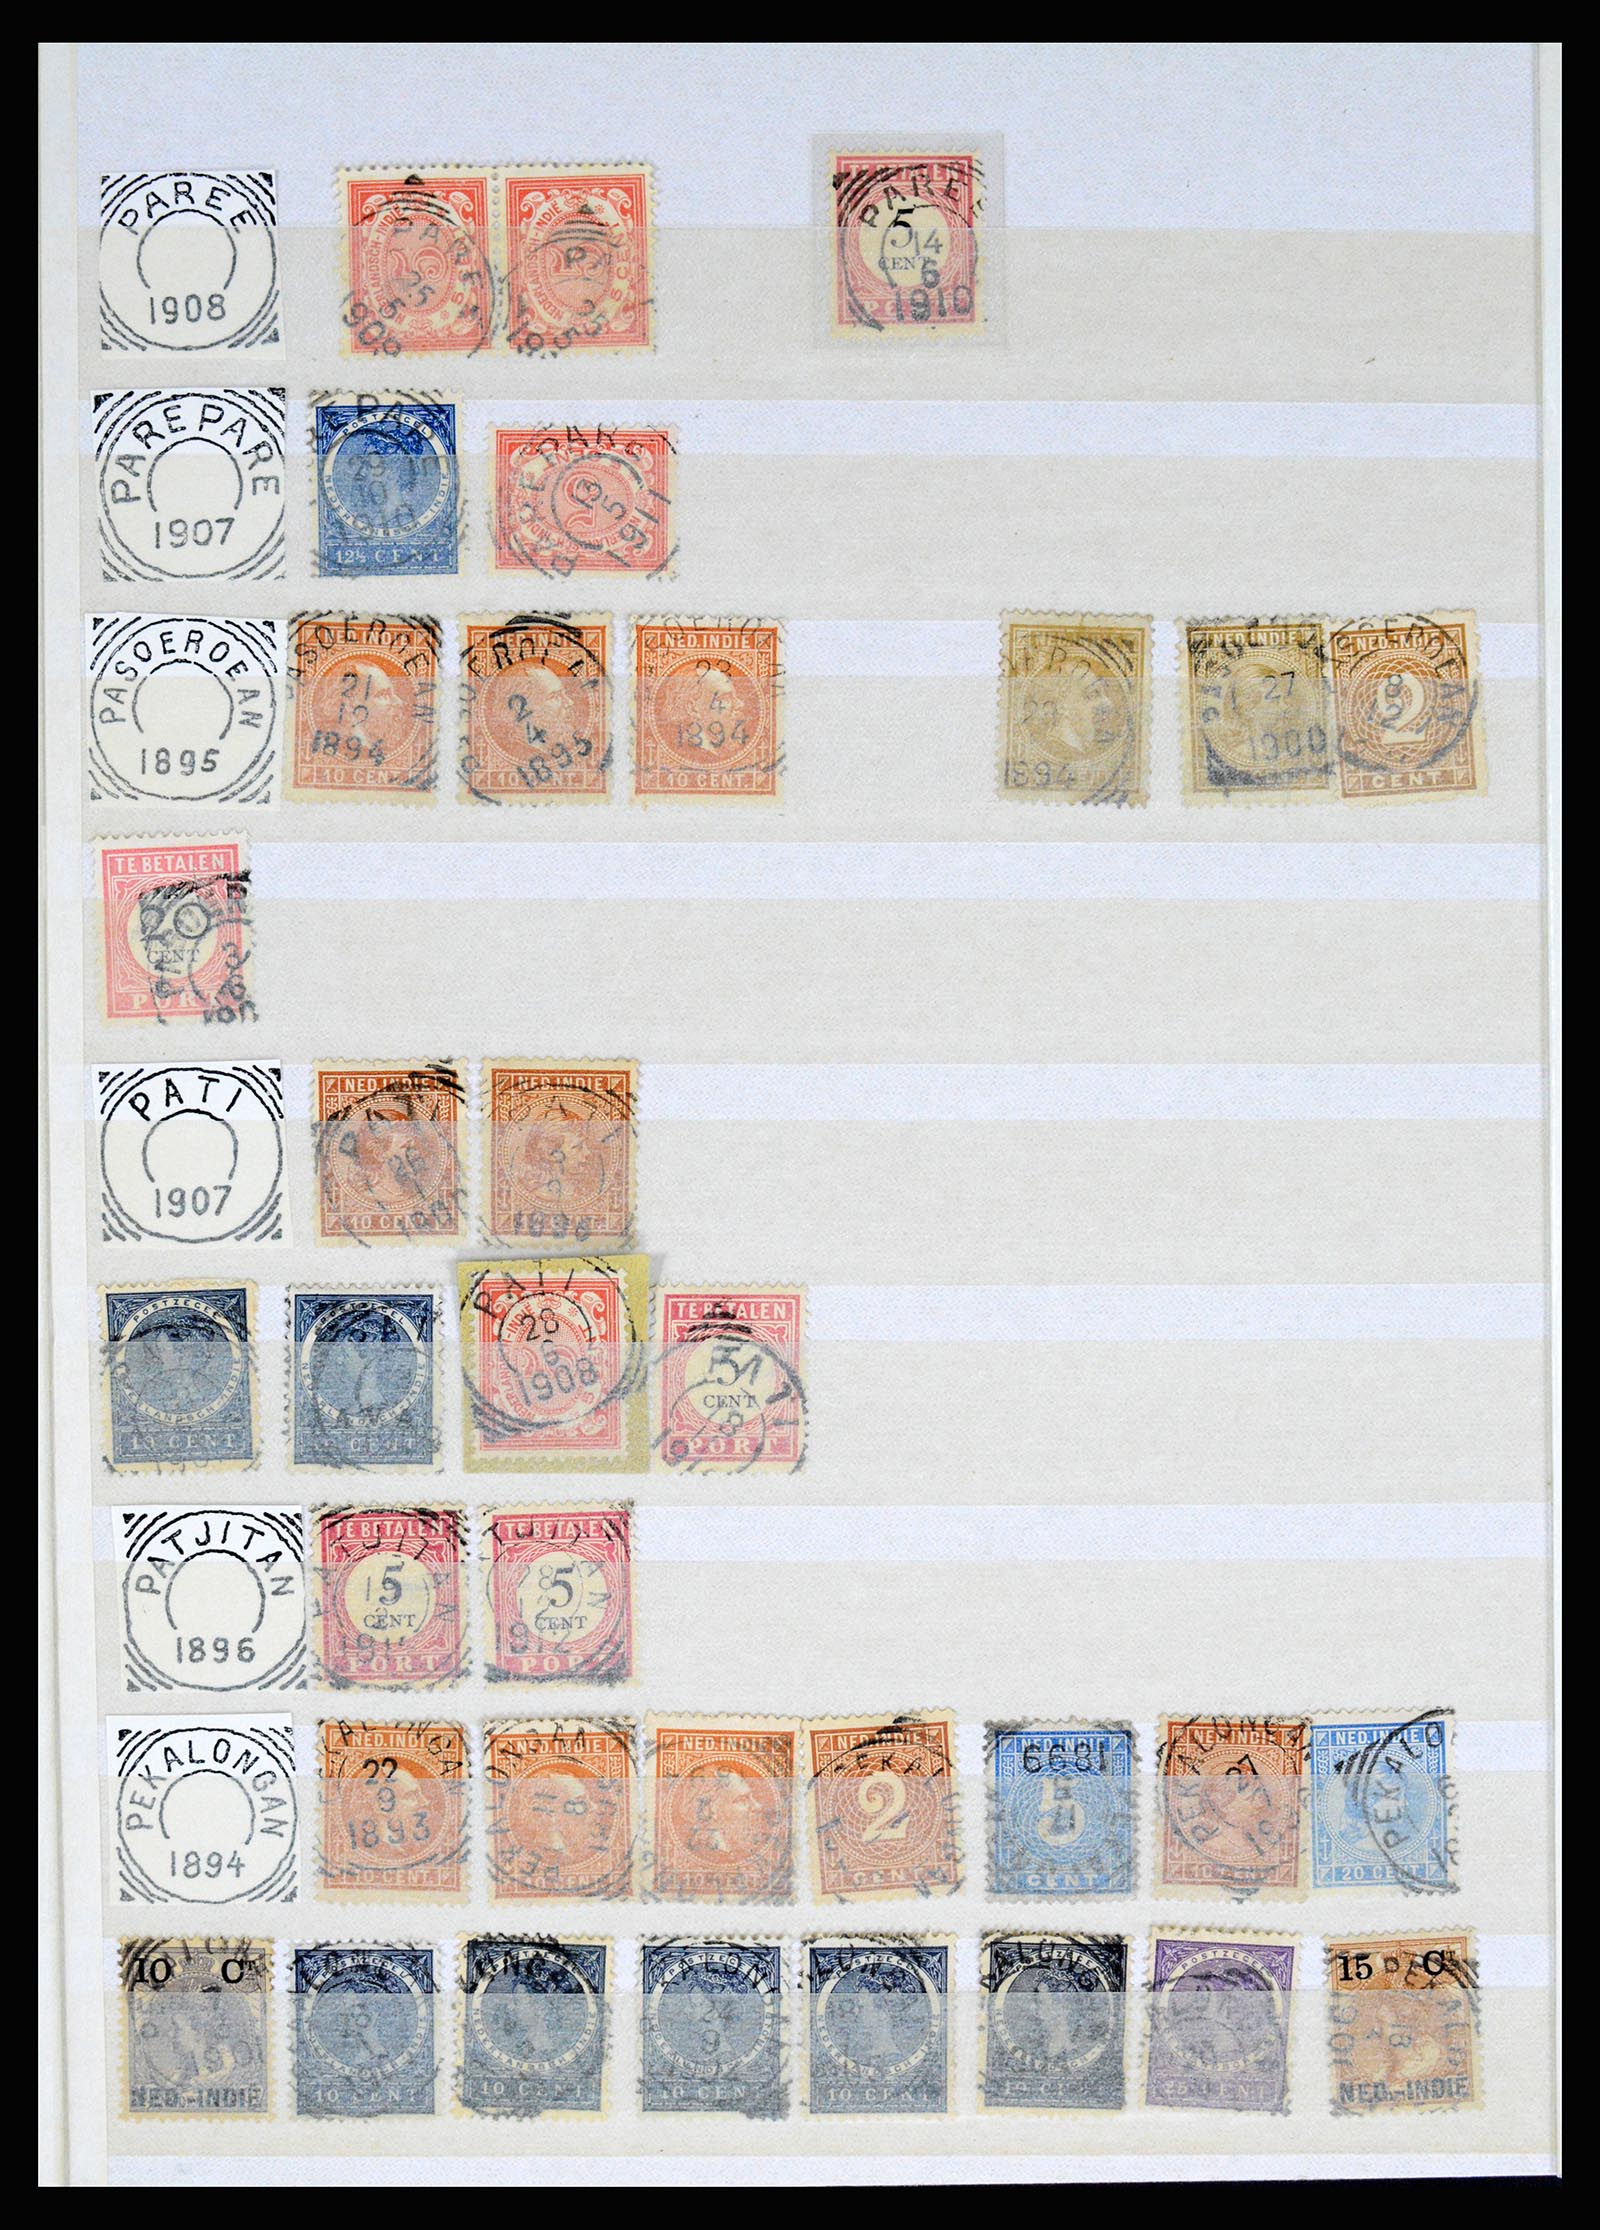 36839 083 - Stamp collection 36839 Dutch east Indies square cancels.